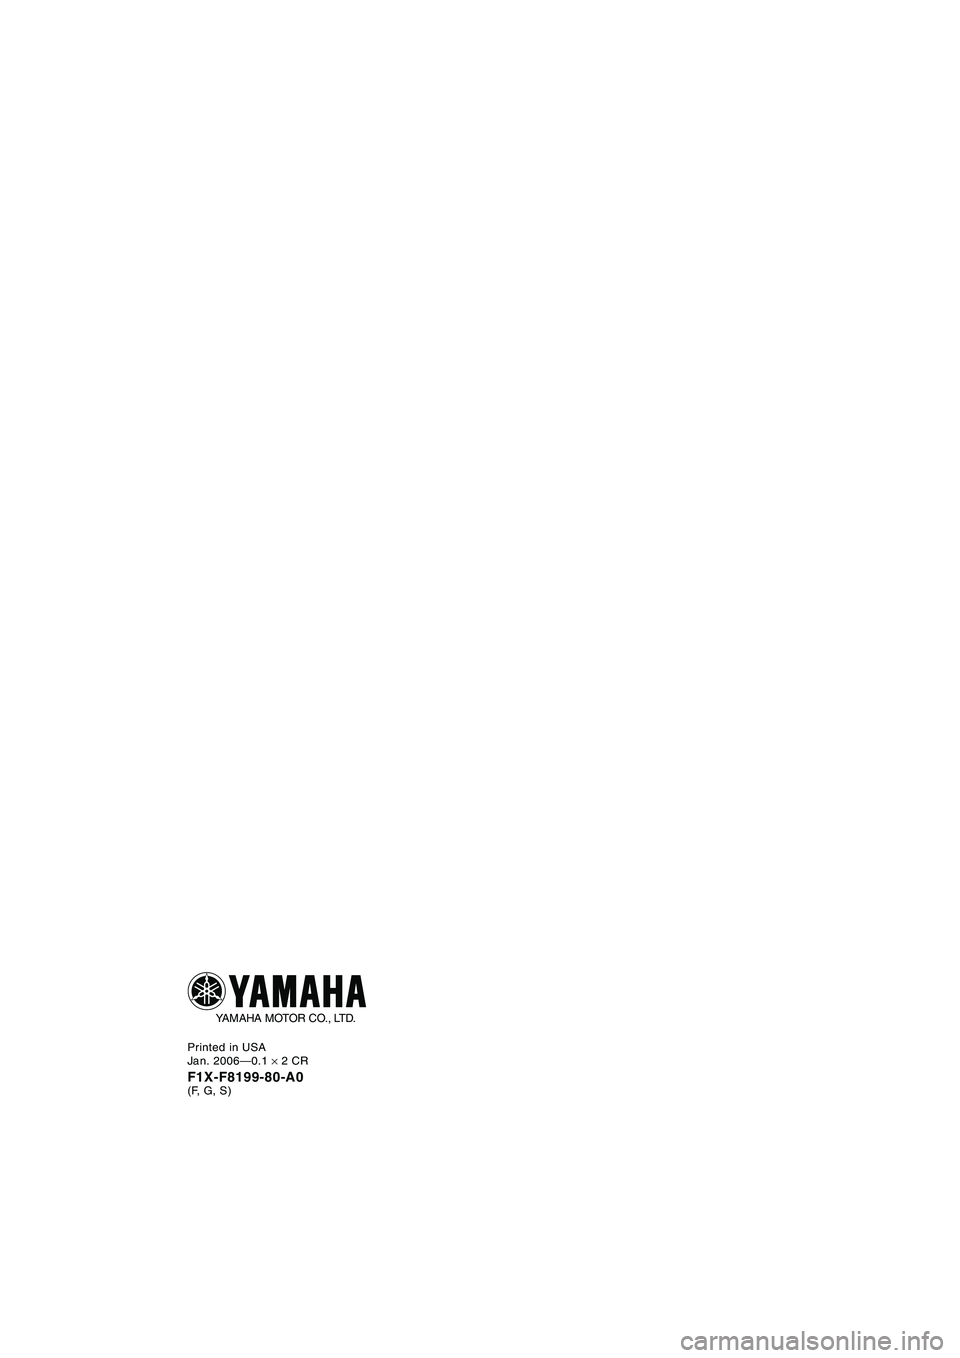 YAMAHA FX HO 2006  Betriebsanleitungen (in German) Printed in USA
Jan. 2006—0.1 × 2 CR
F1X-F8199-80-A0(F, G, S)
YAMAHA MOTOR CO., LTD.
U-WC_Cover4_F1X_80-A.fm  Page 1  Tuesday, January 31, 2006  10:35 AM 